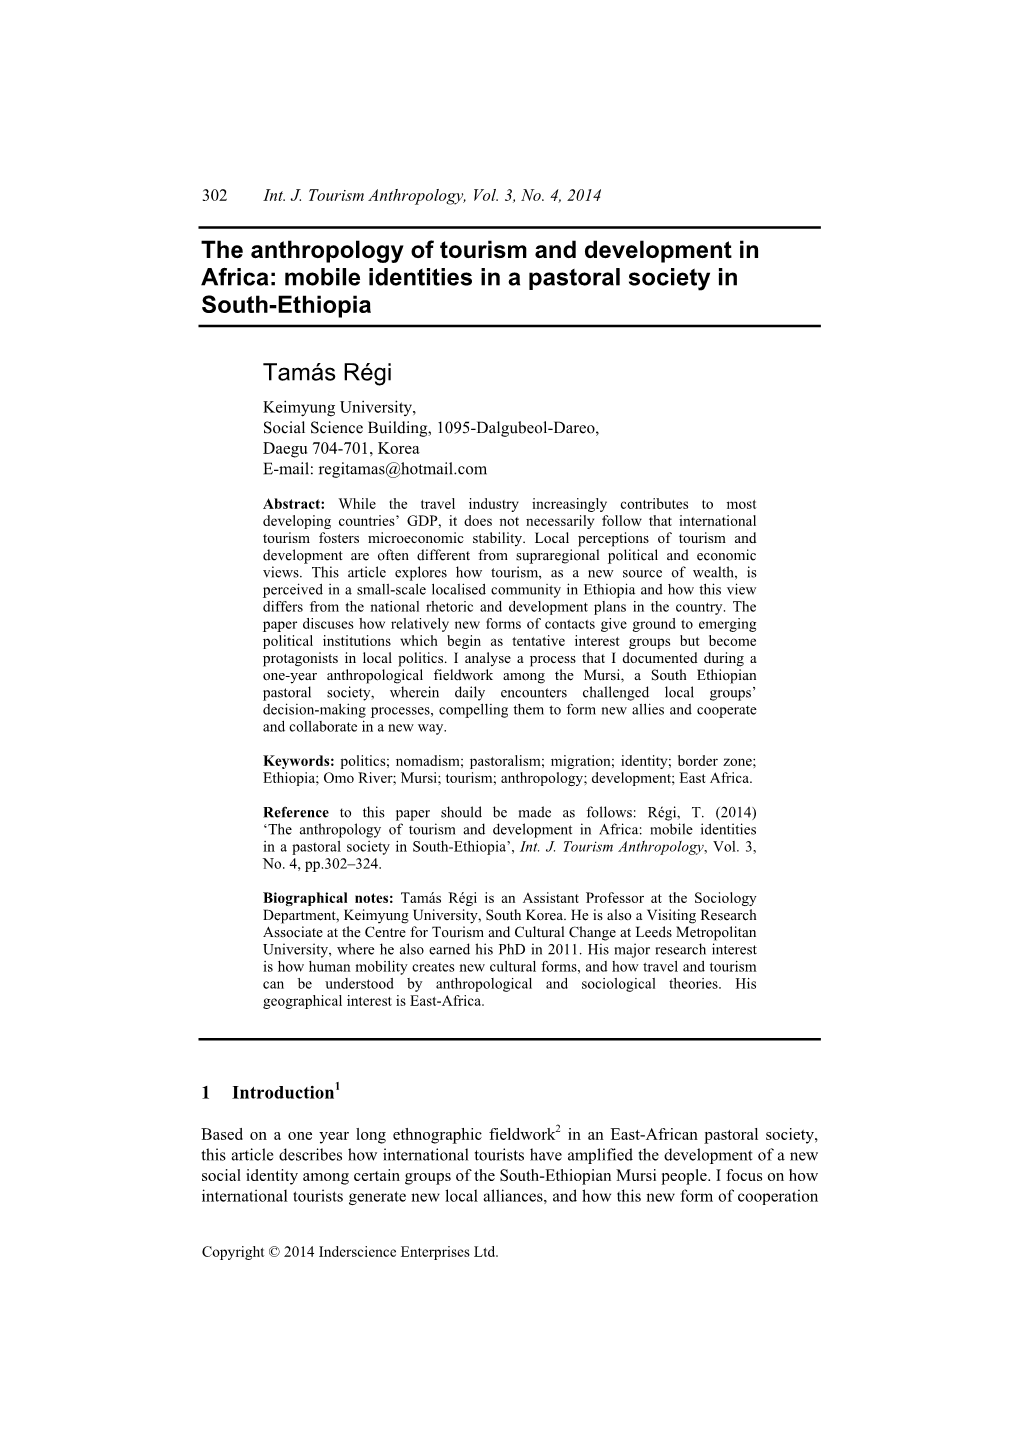 The Anthropology of Tourism and Development in Africa: Mobile Identities in a Pastoral Society in South-Ethiopia